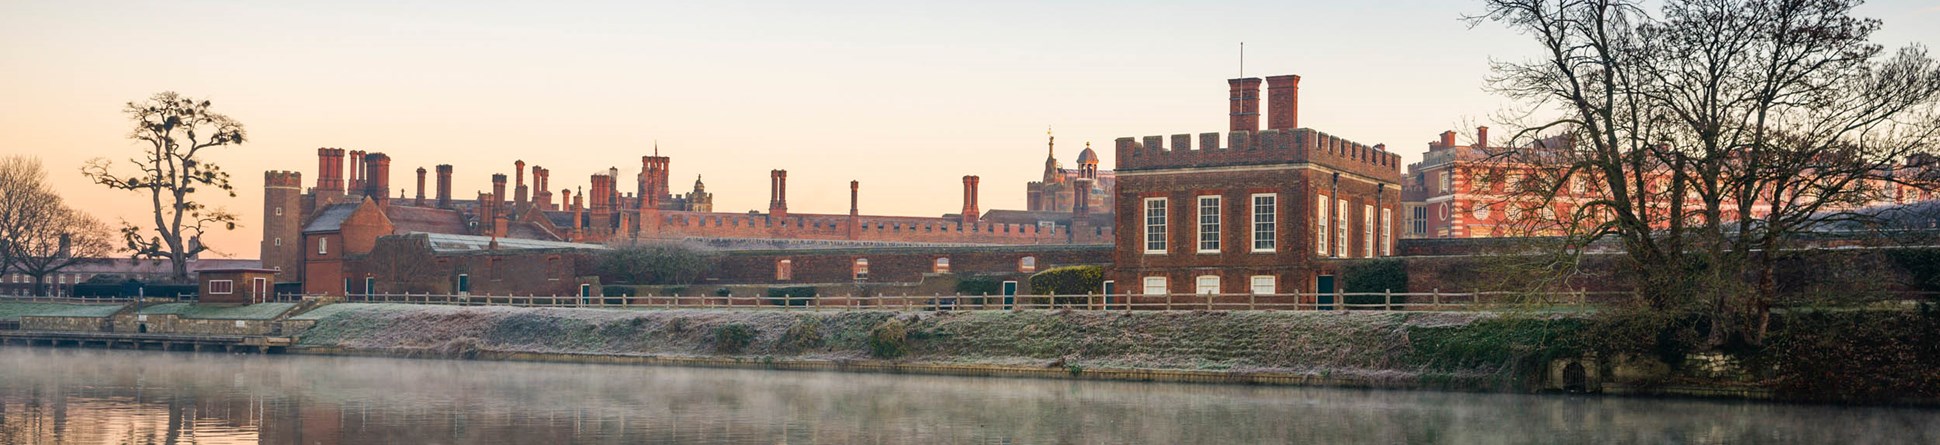 The Banqueting House and Hampton Court Palace with mist rising from the River Thames on a cold morning in the foreground.